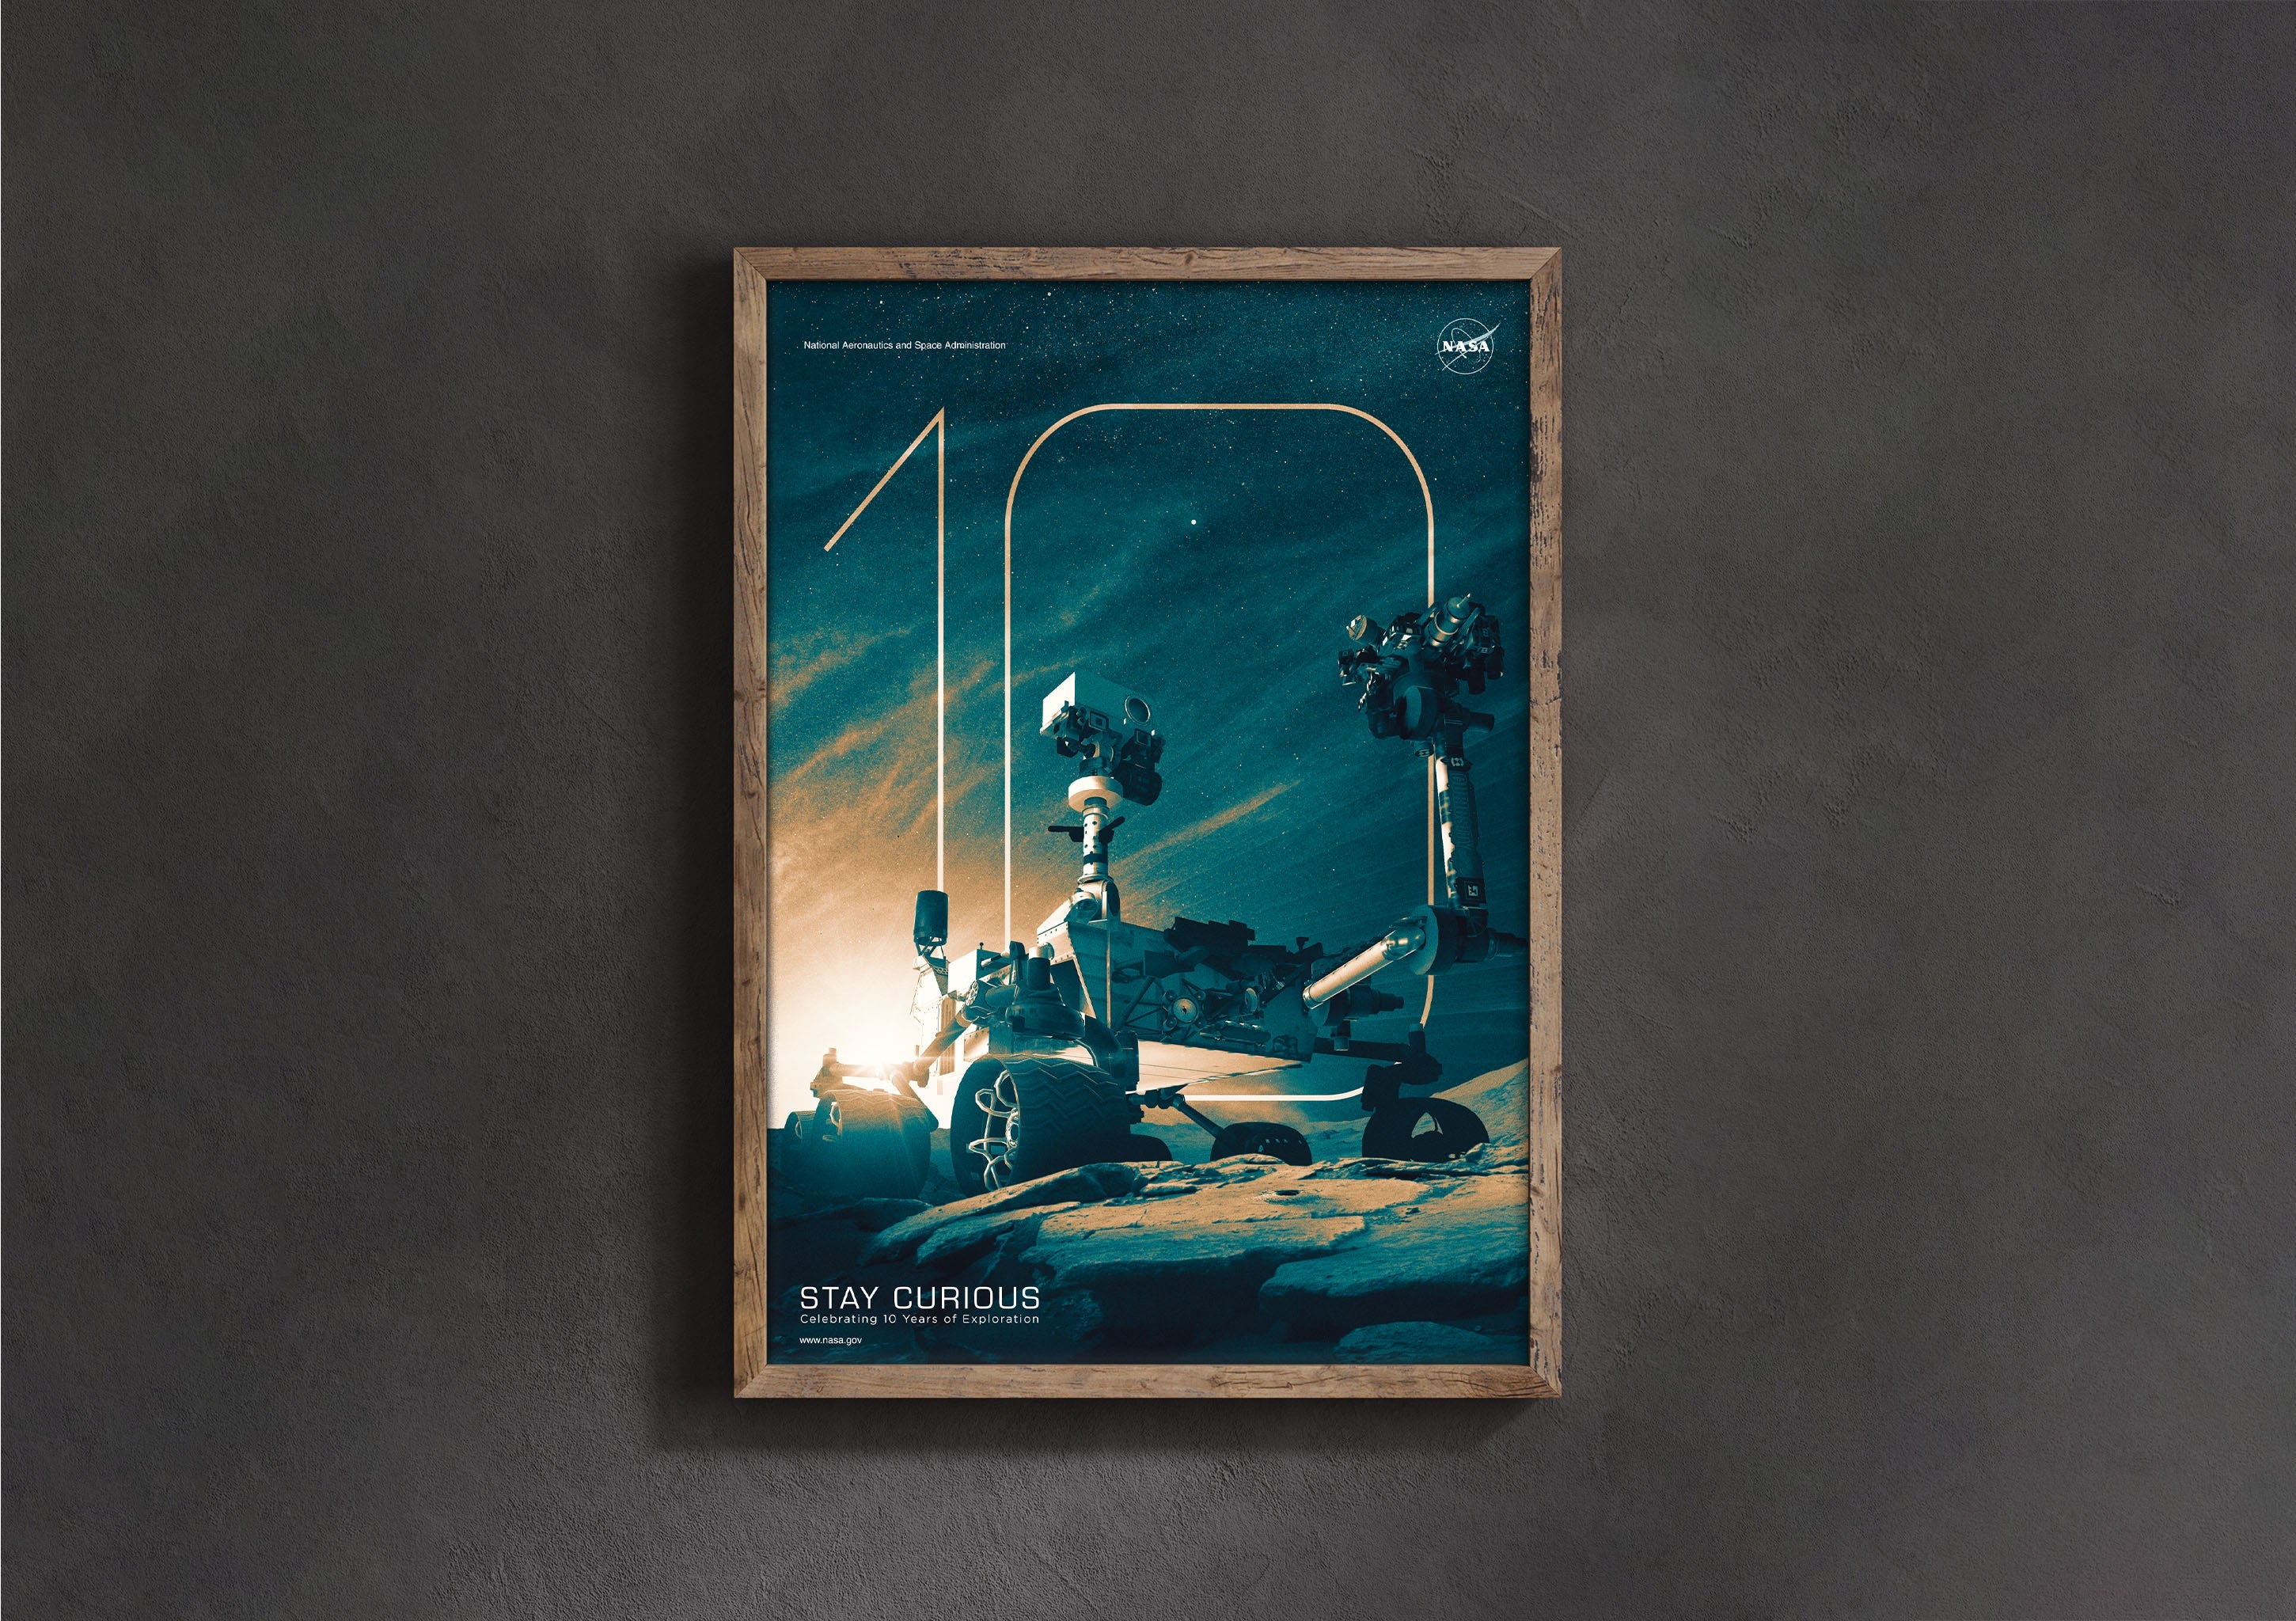 10 years of Curiosity on Mars - NASA Posters - 2 Sheets